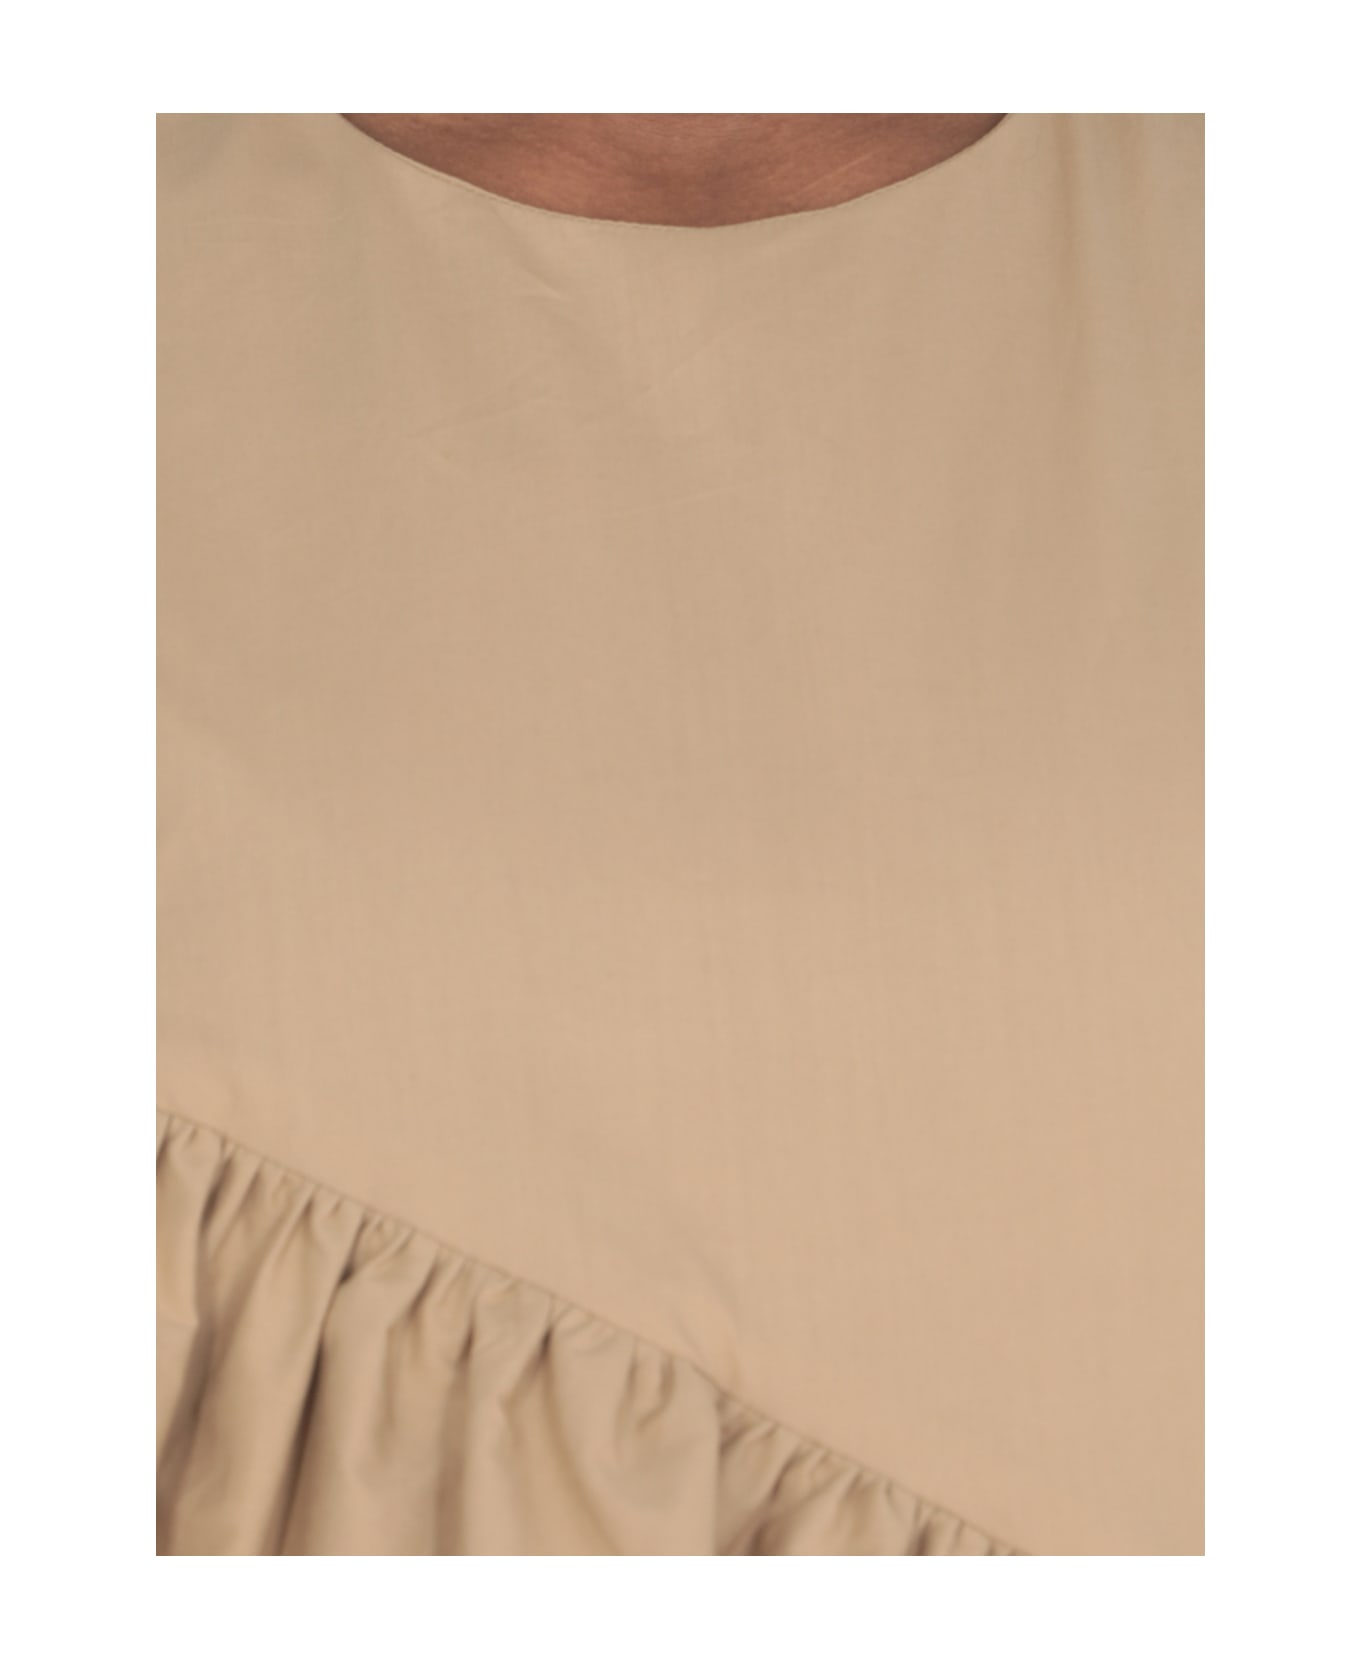 MSGM Dress With Rouches - Beige